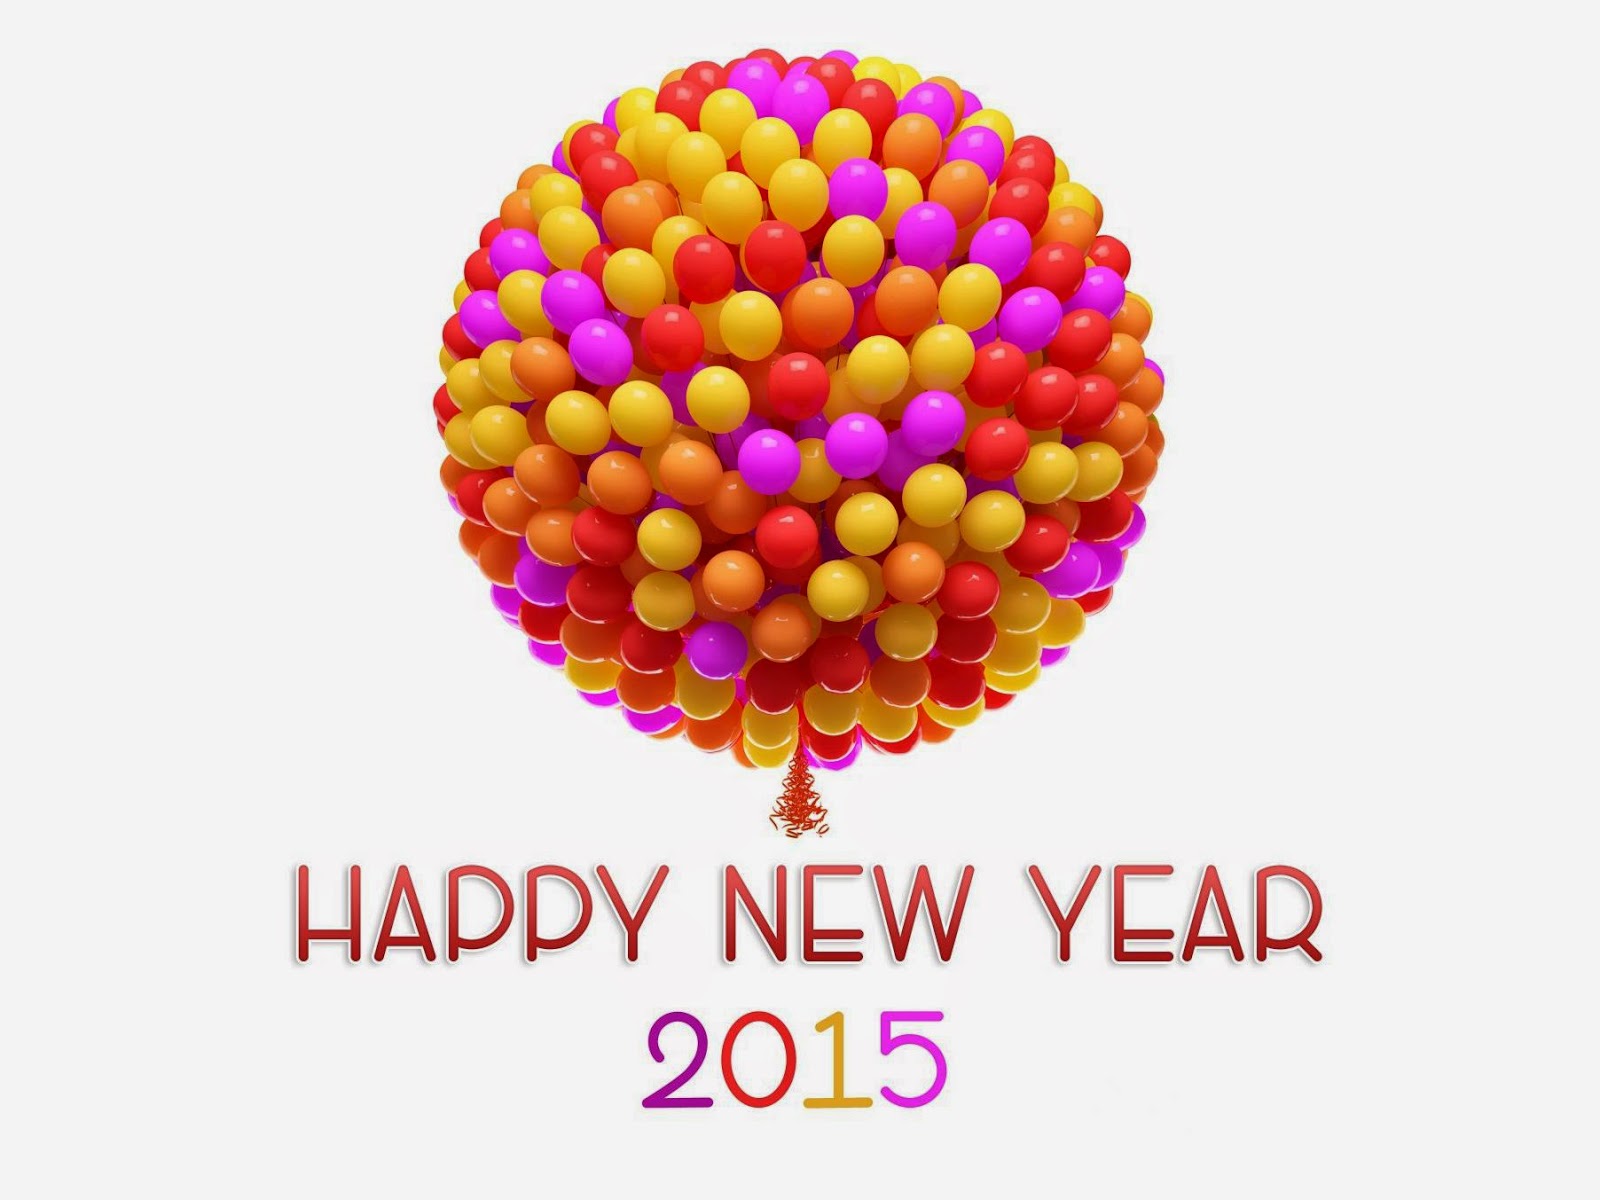 Happy-New-Year-2015-Greetings-Cards-Images-for-Whatsapp-Facebook5.jpg